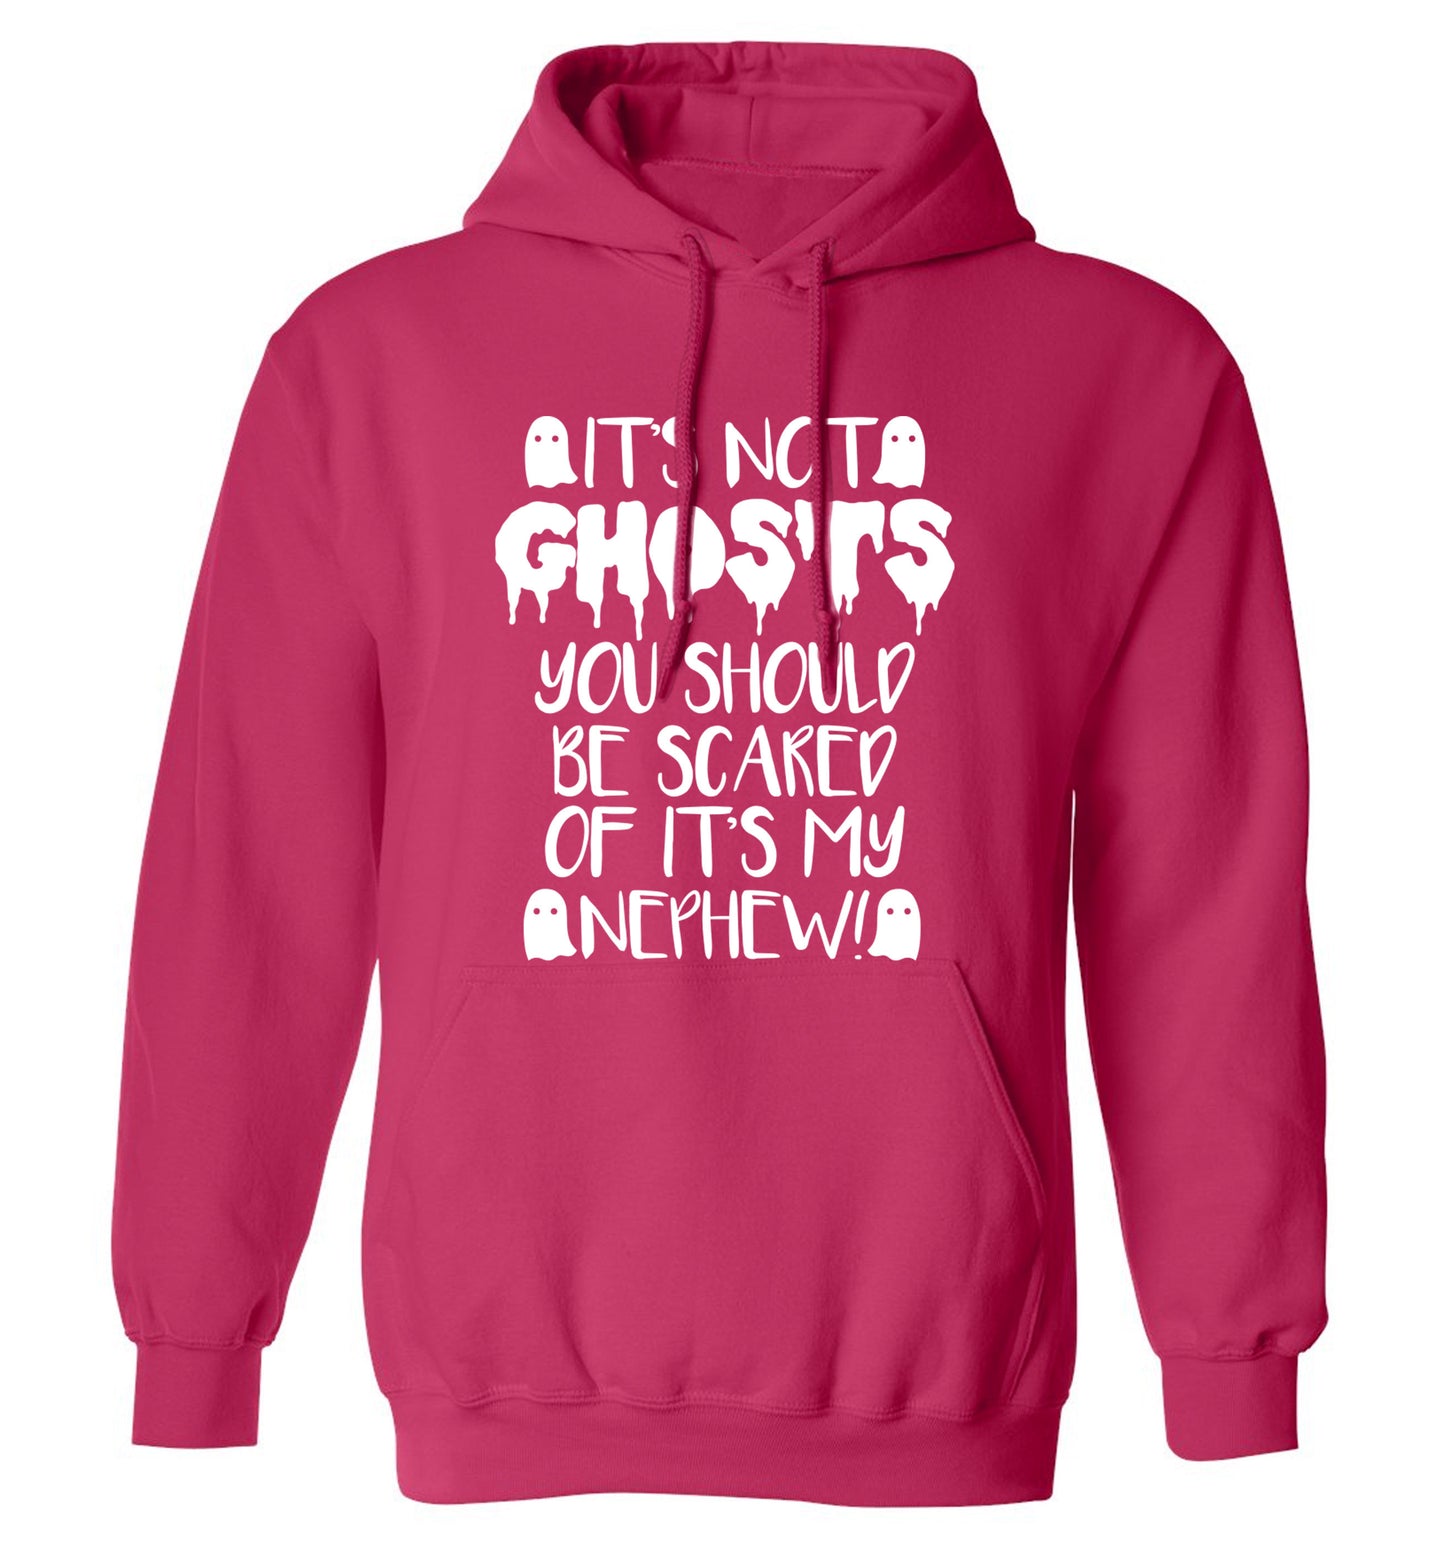 It's not ghosts you should be scared of it's my nephew! adults unisex pink hoodie 2XL